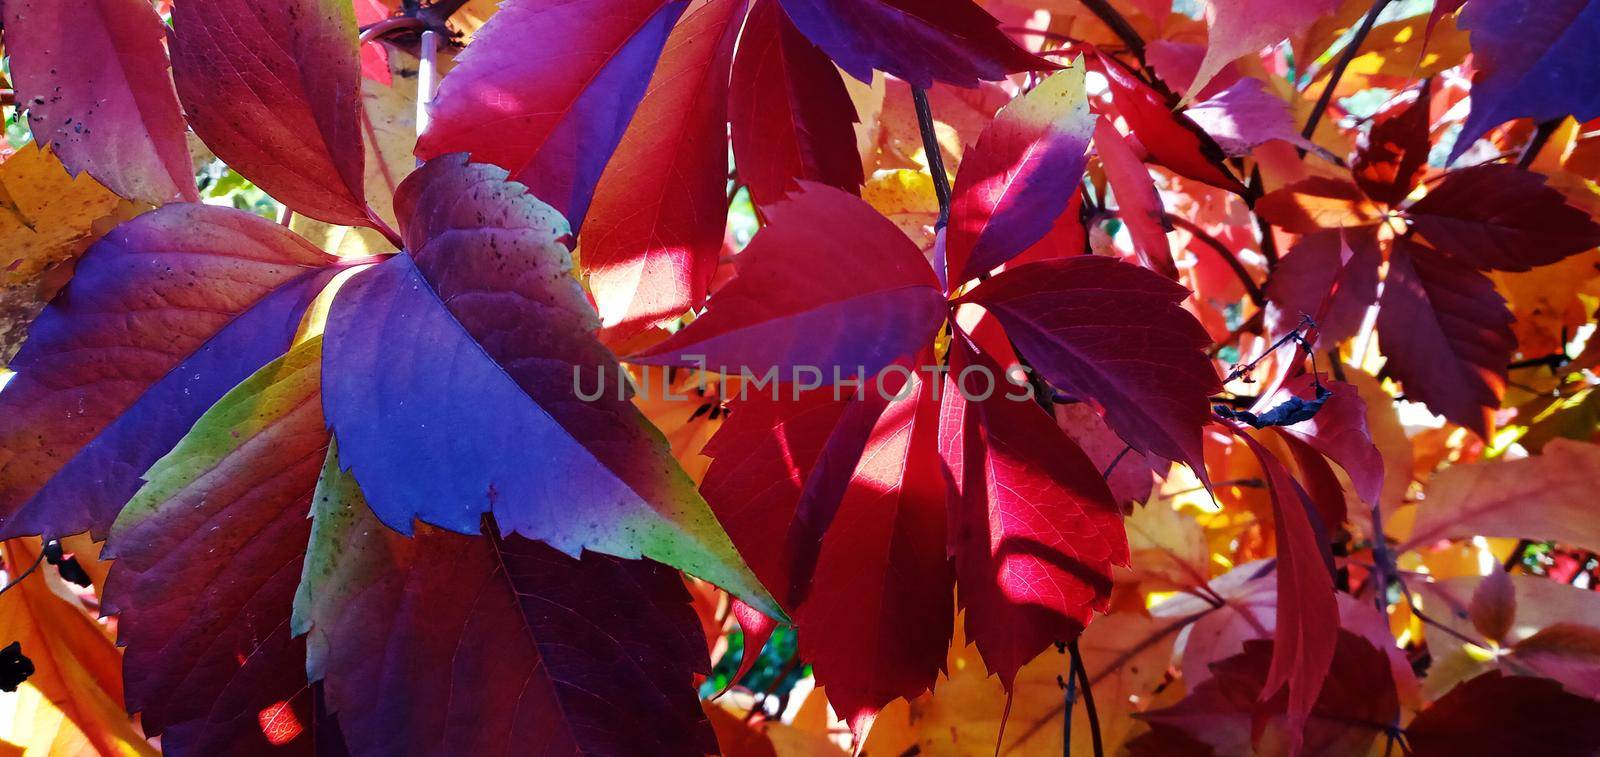 Wild grapes with red leaves grow thickly on the fence on an autumn day. Full Frame Shot Of Autumnal Leaves. Branch of wild grapes with red autumn leaves.